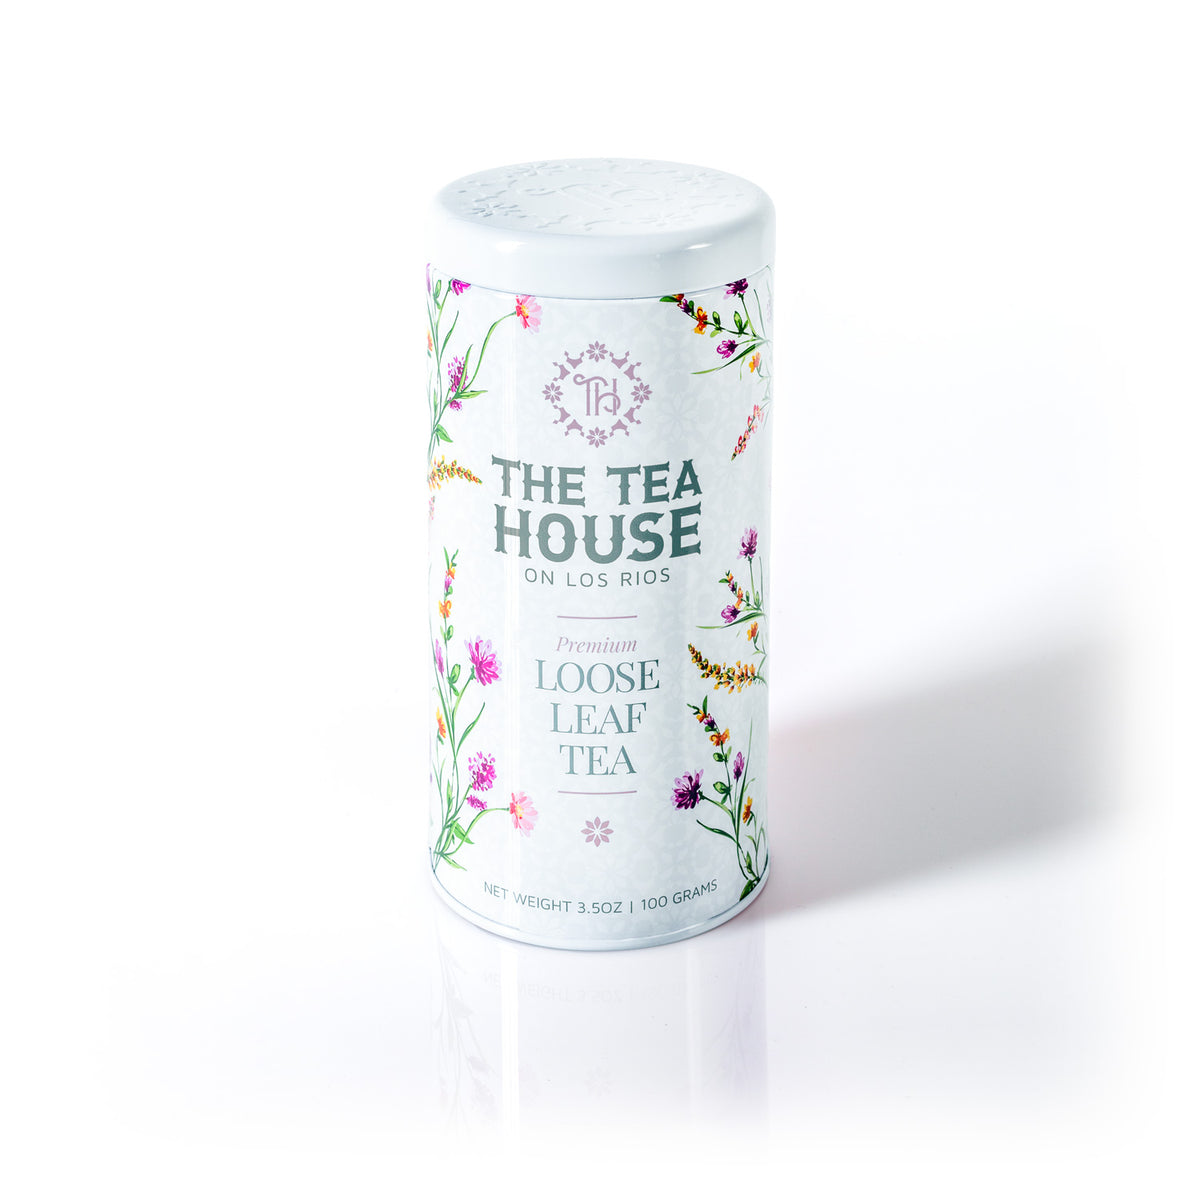 Explore The Tea House on Los Rios with this NEW 100g Loose Leaf Tea Tin